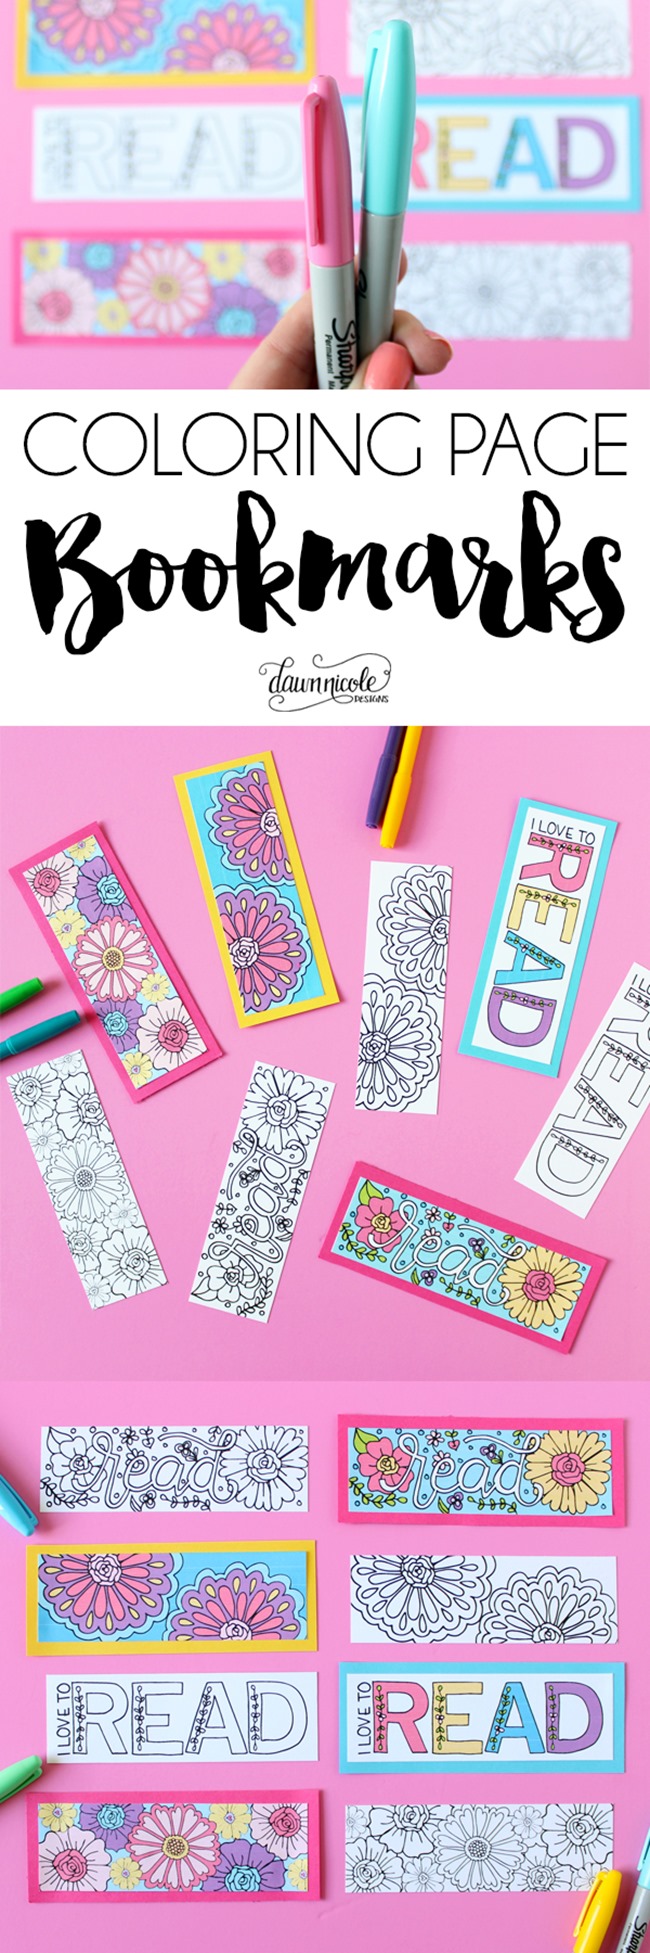 Summer Coloring Pages bookmarks by Dawn Nicole